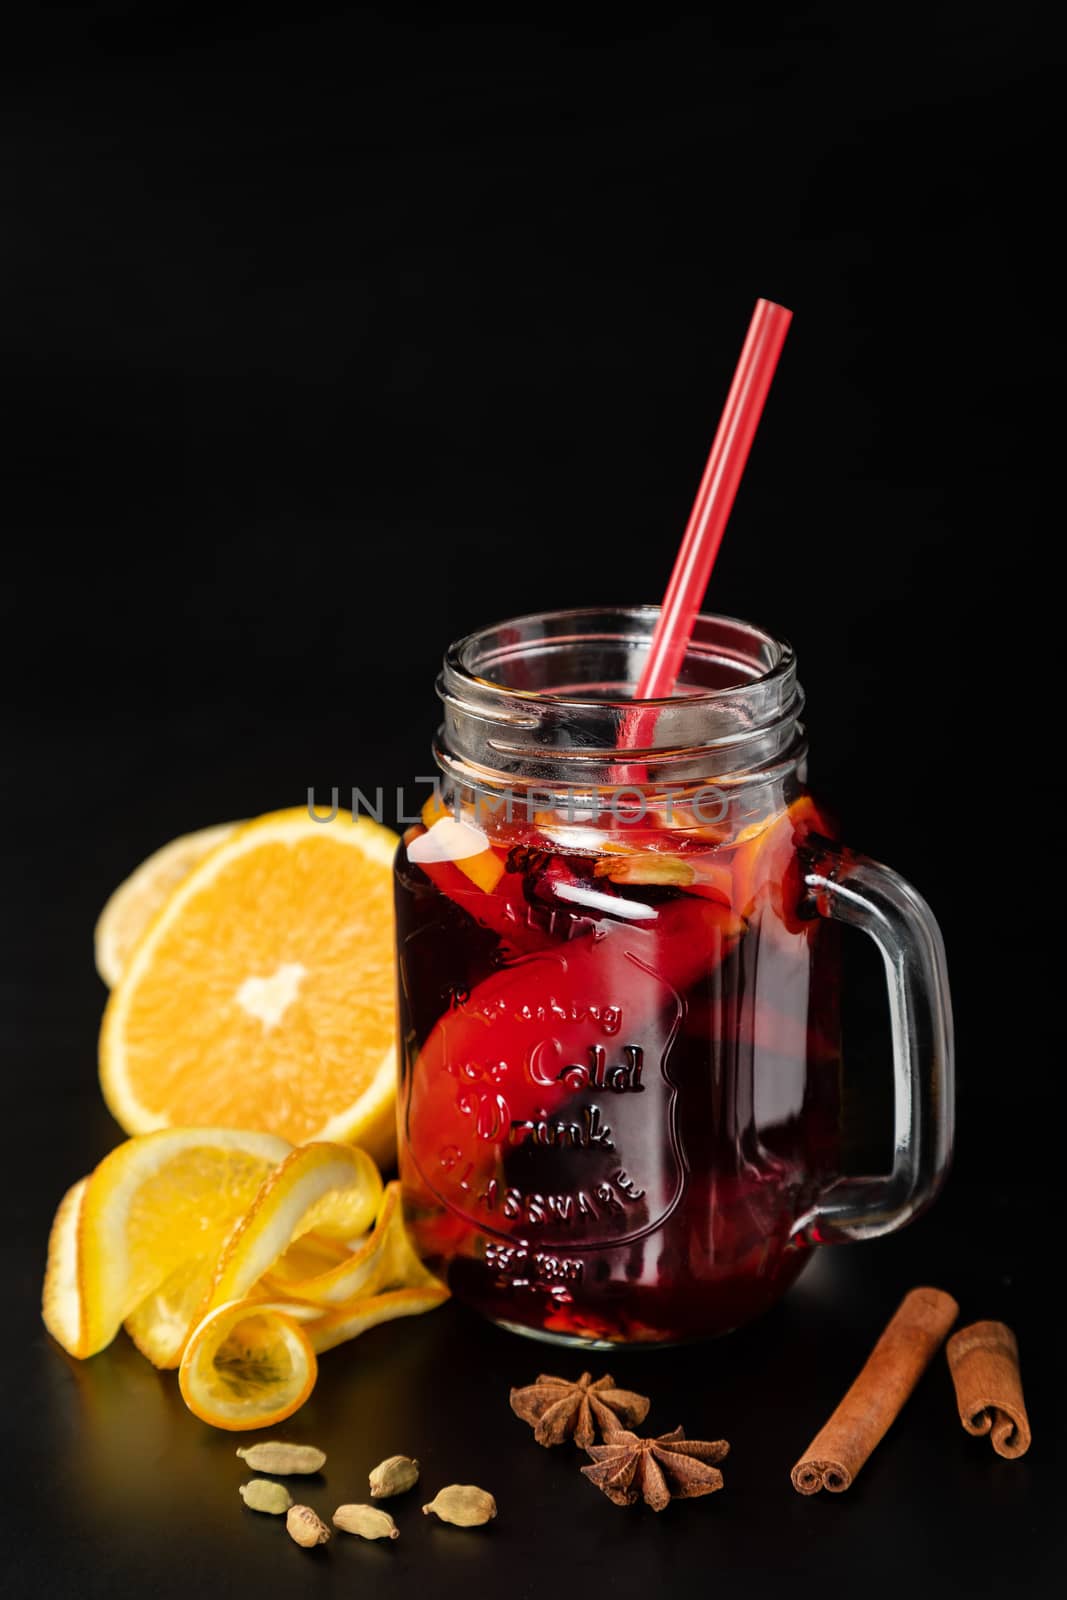 Mulled wine in a glass mug with fruits and spices by sveter